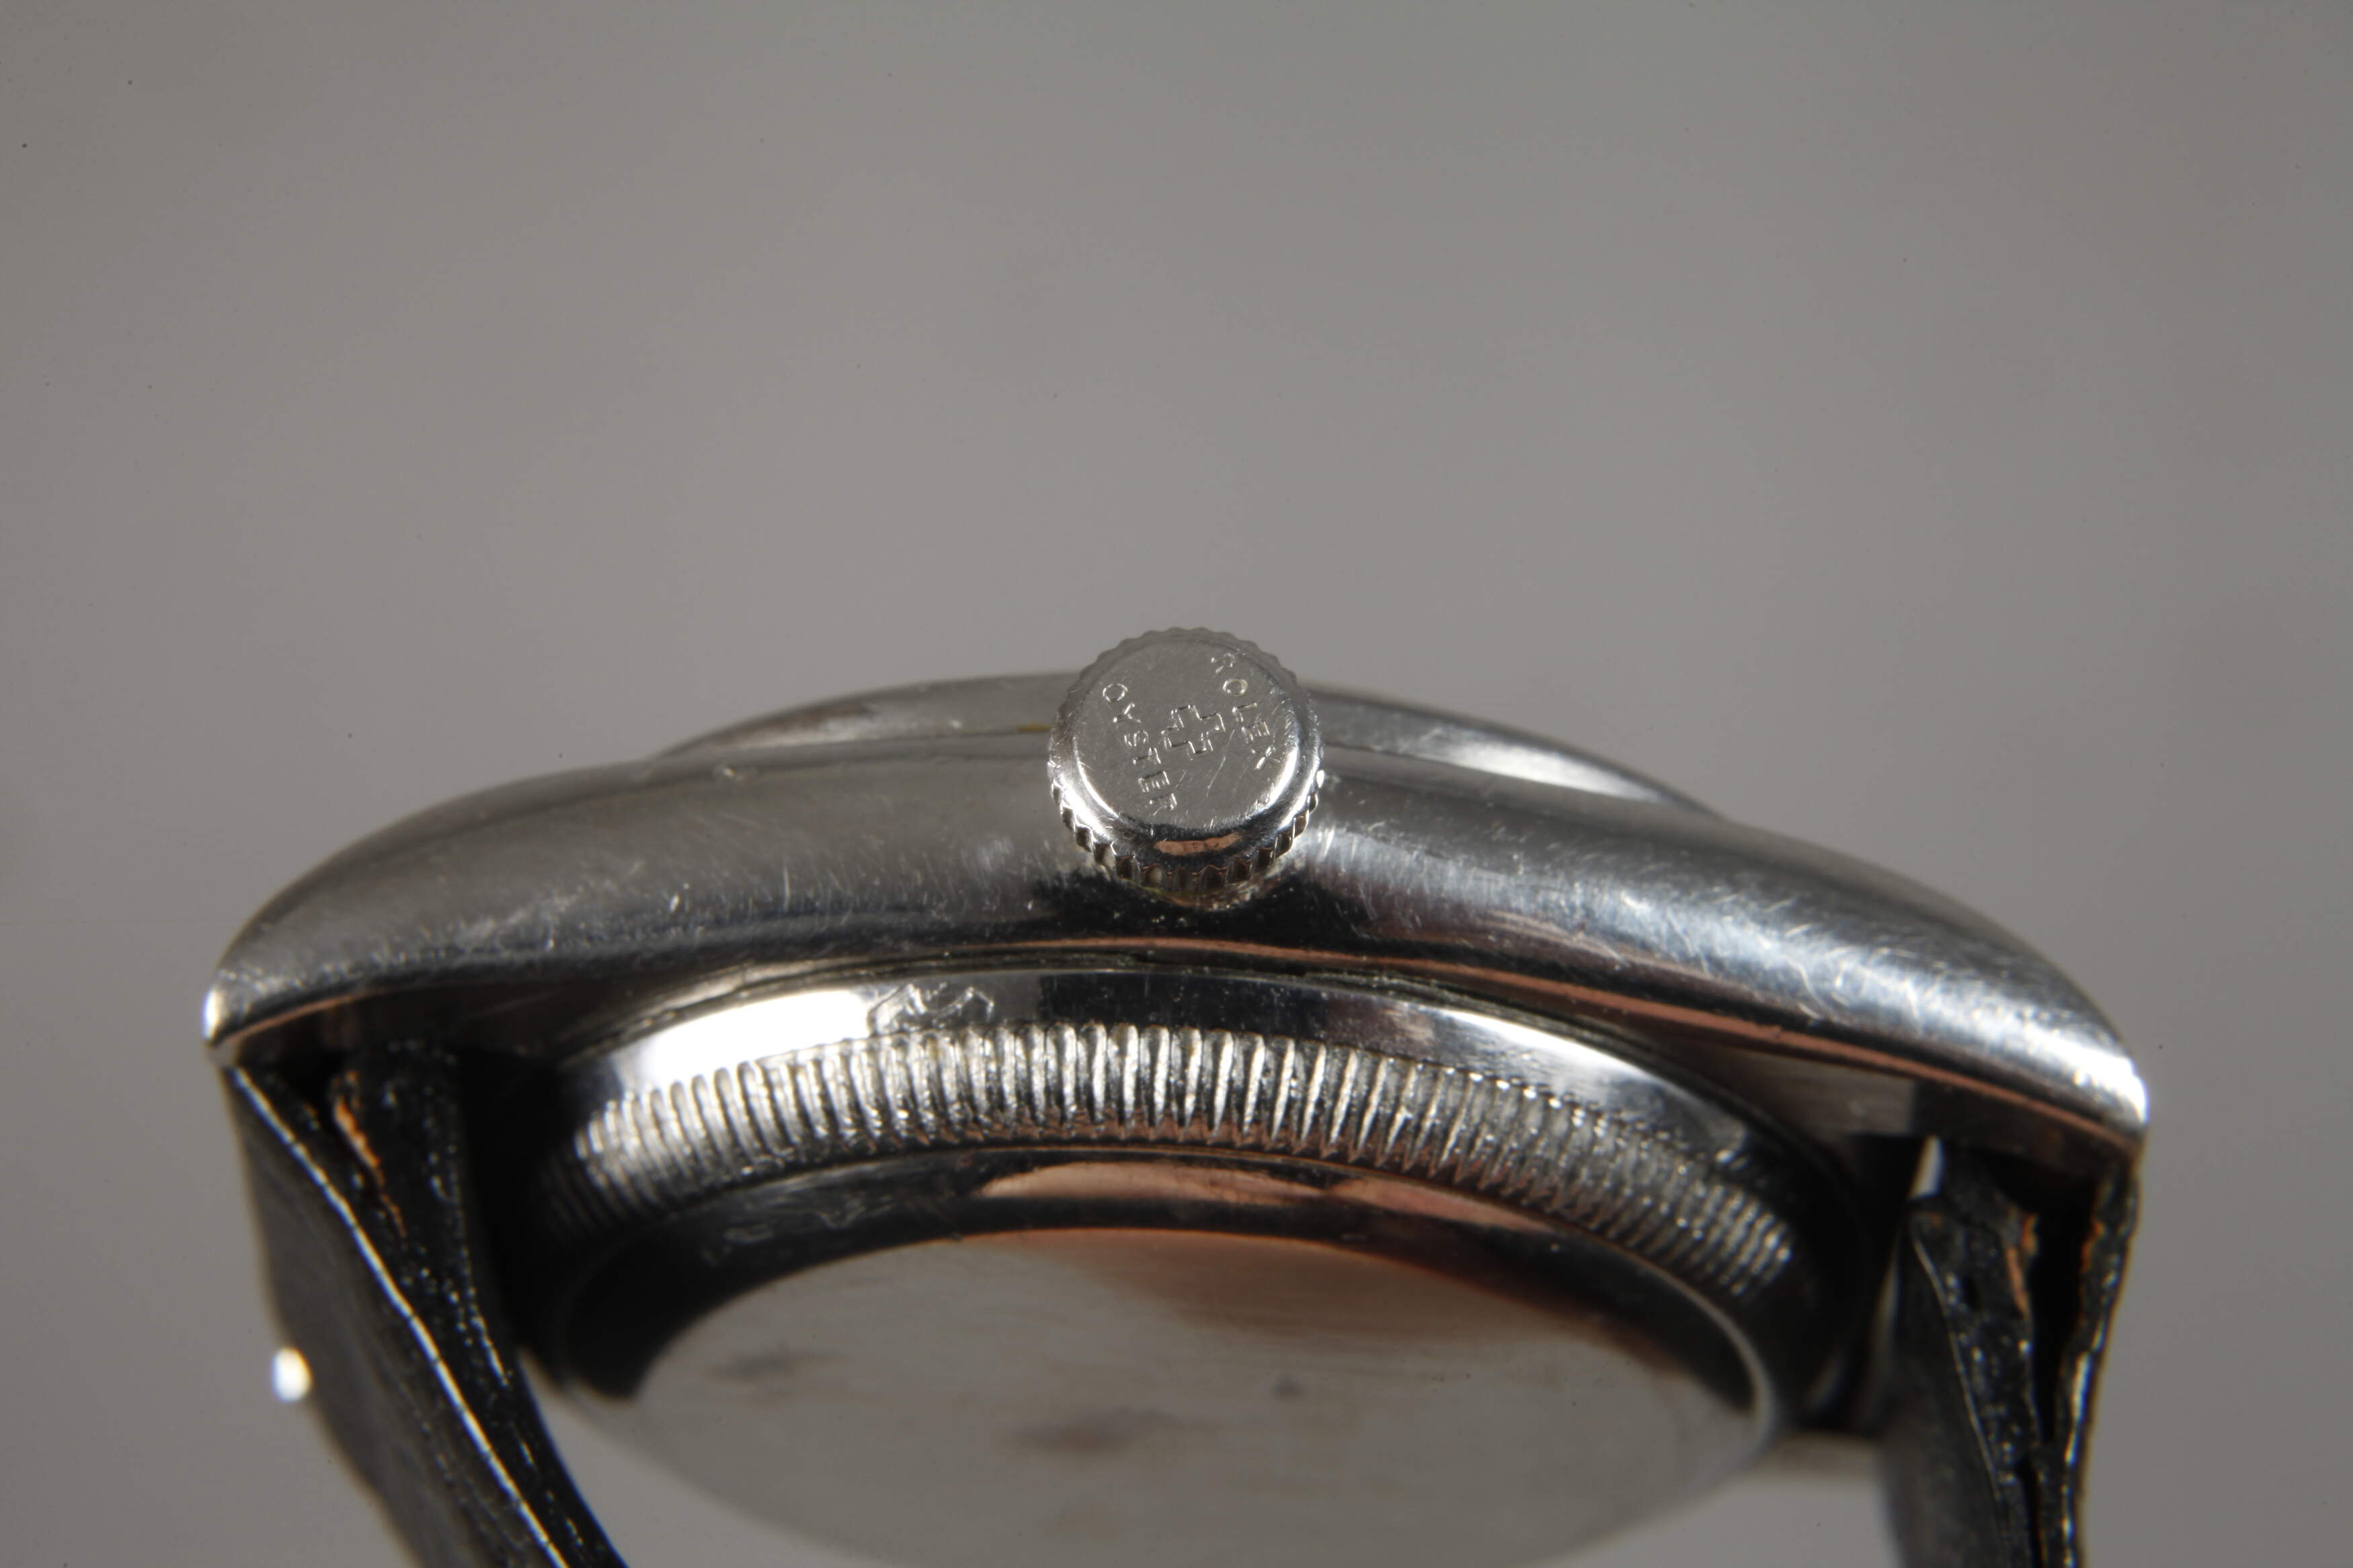 Early Rolex Oyster Perpetual Bubble Back - Image 7 of 7